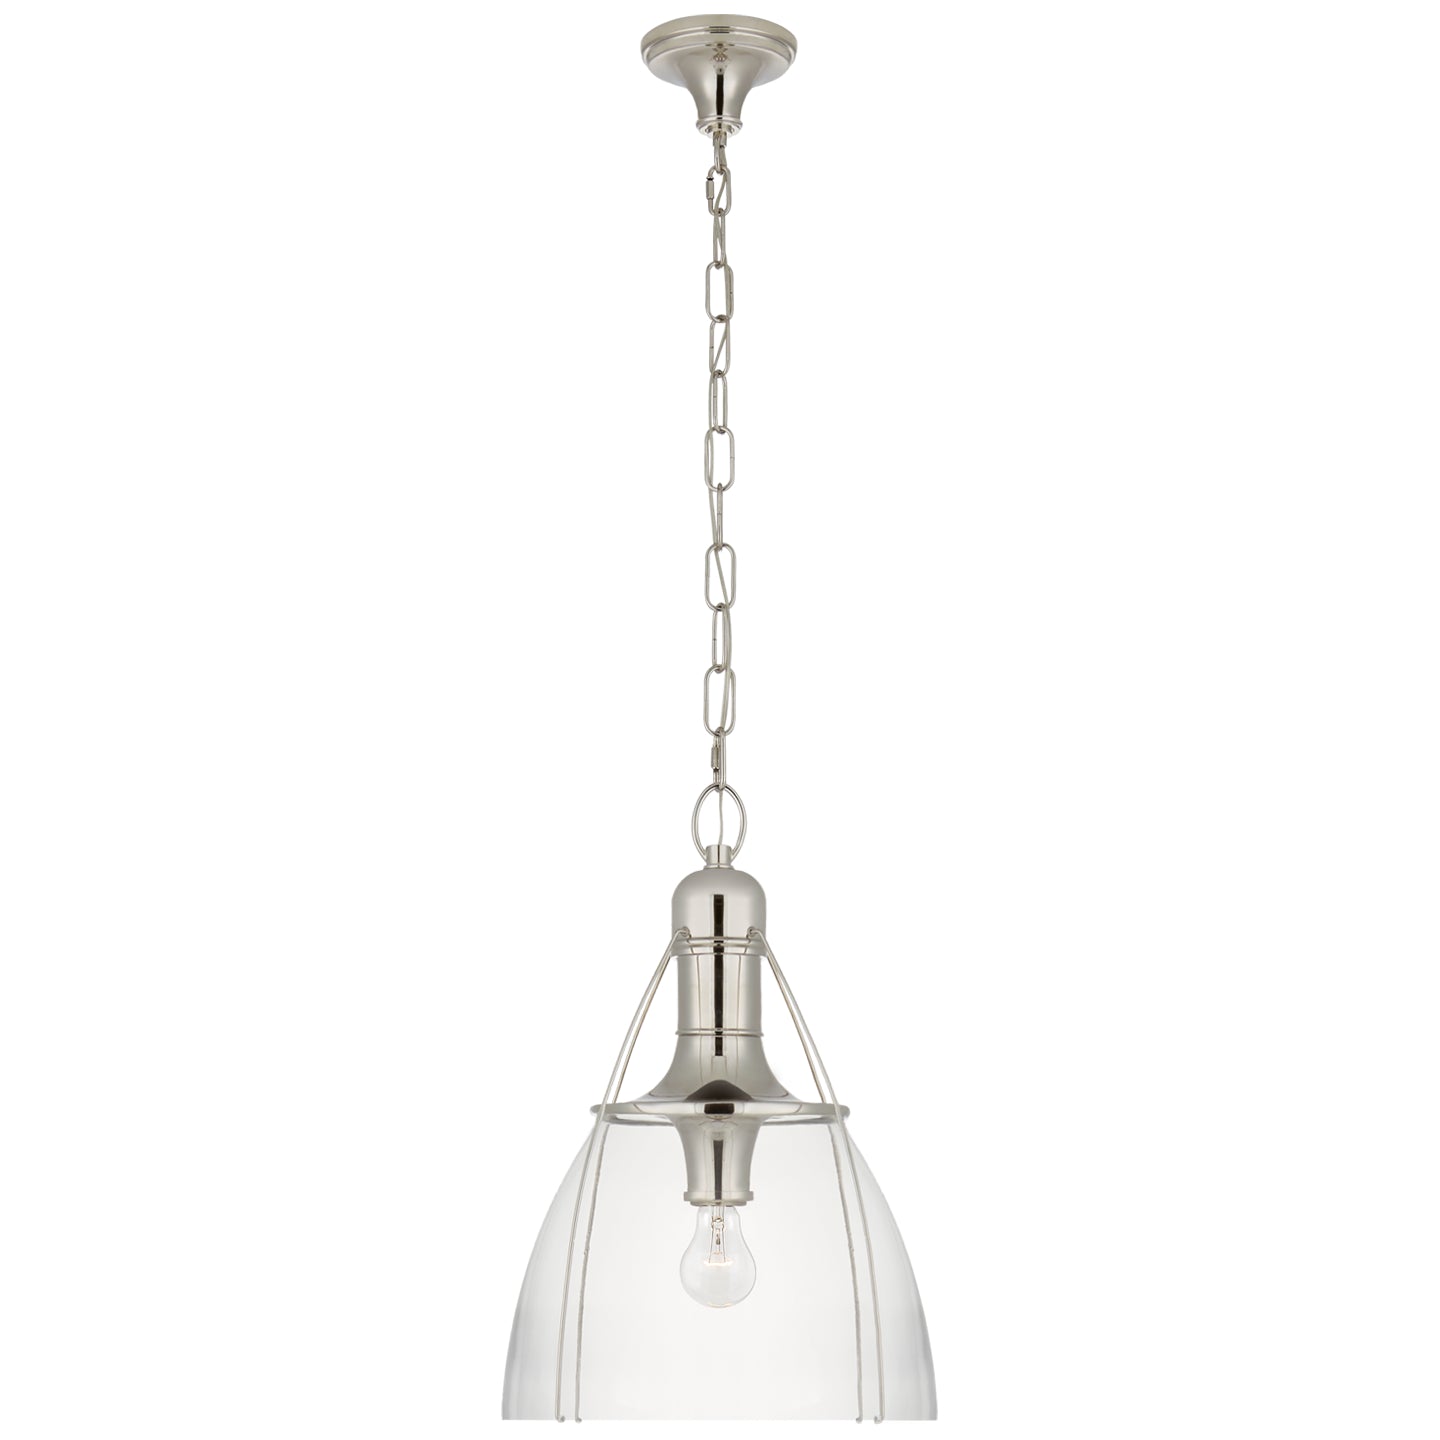 Load image into Gallery viewer, Visual Comfort Signature - CHC 5476PN-CG - One Light Pendant - Prestwick - Polished Nickel
